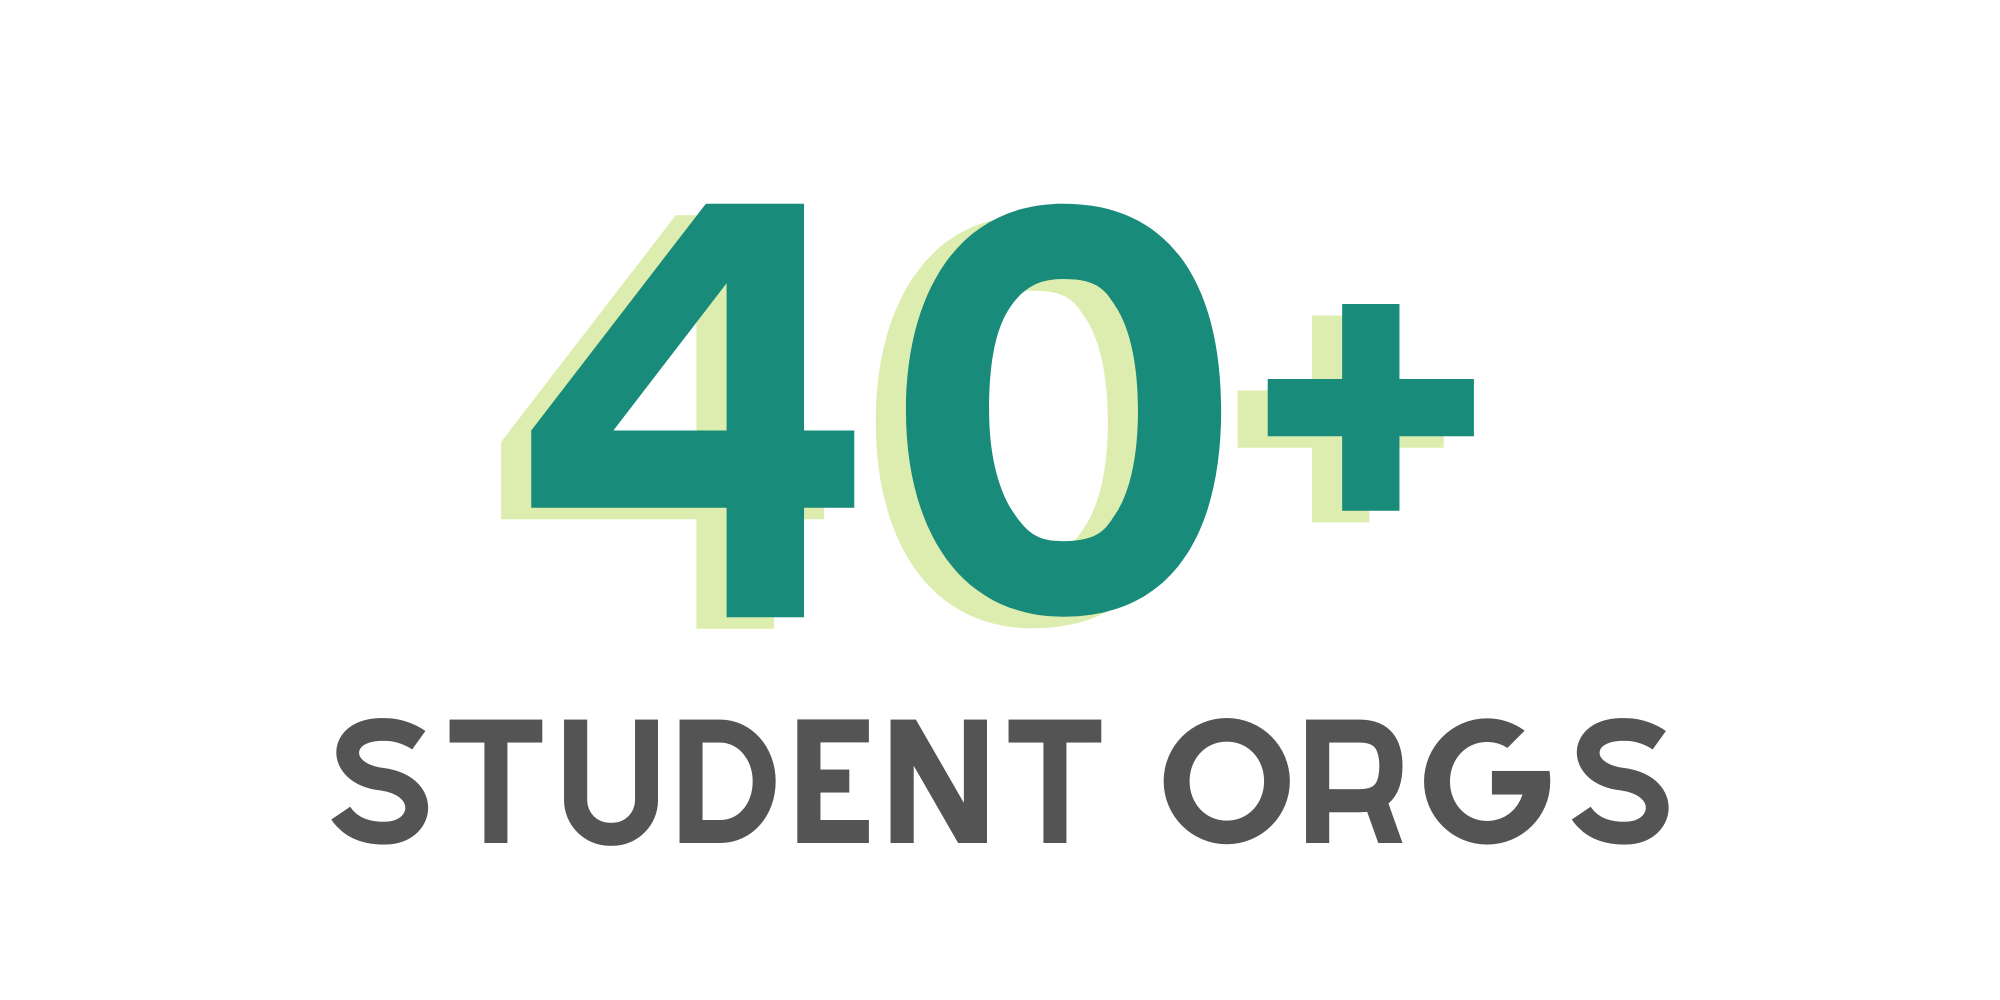 40+ student orgs